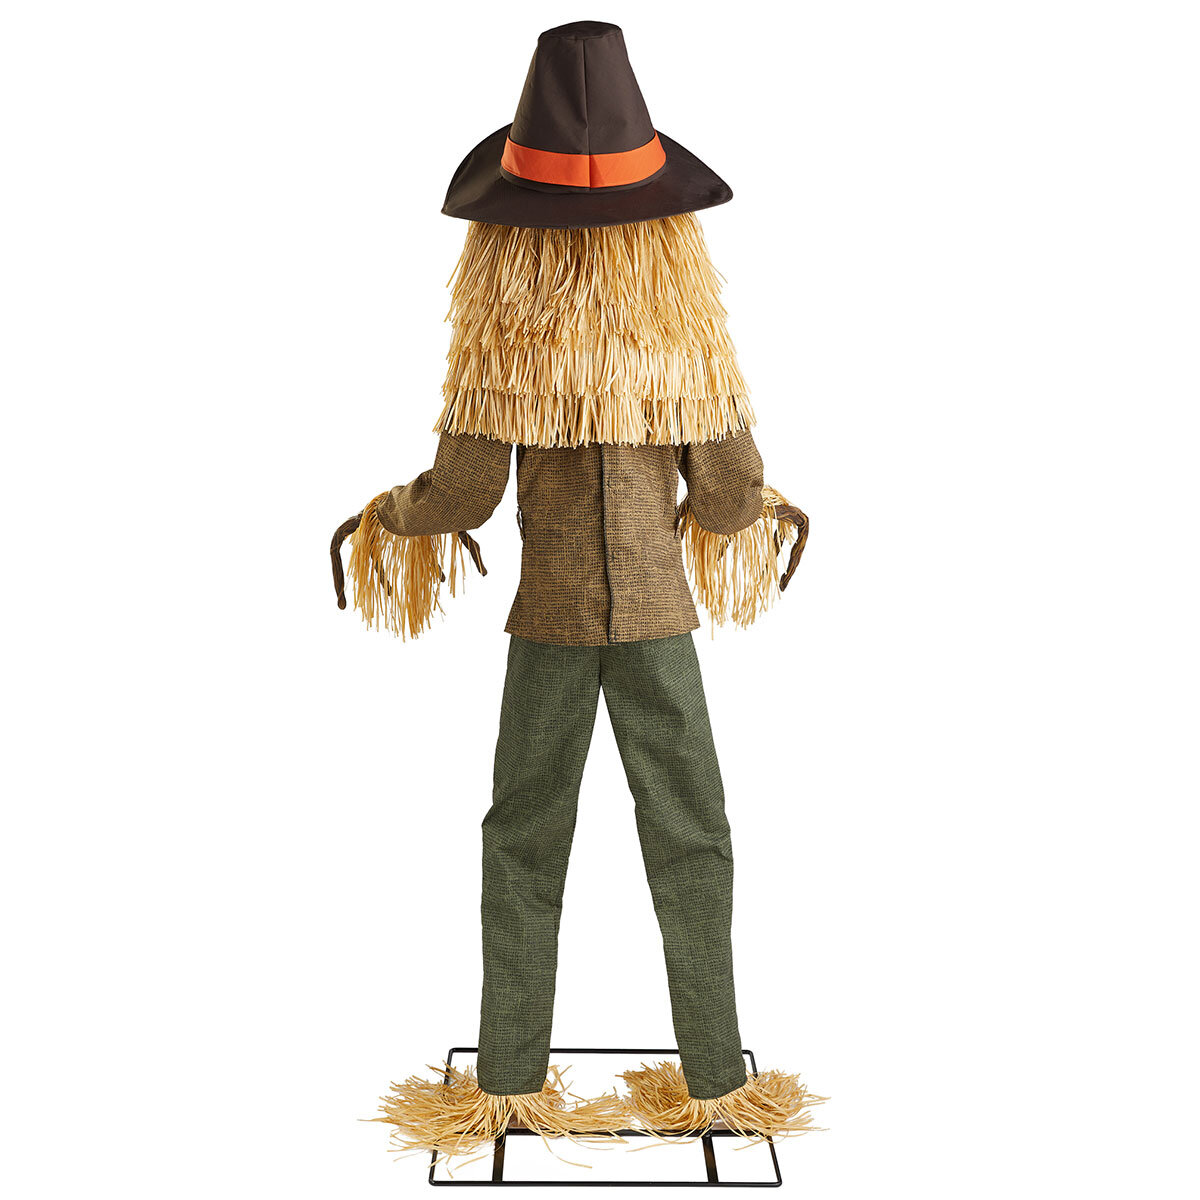 Buy Big Head JOL Scarecrow Cut Out Image at Costco.co.uk